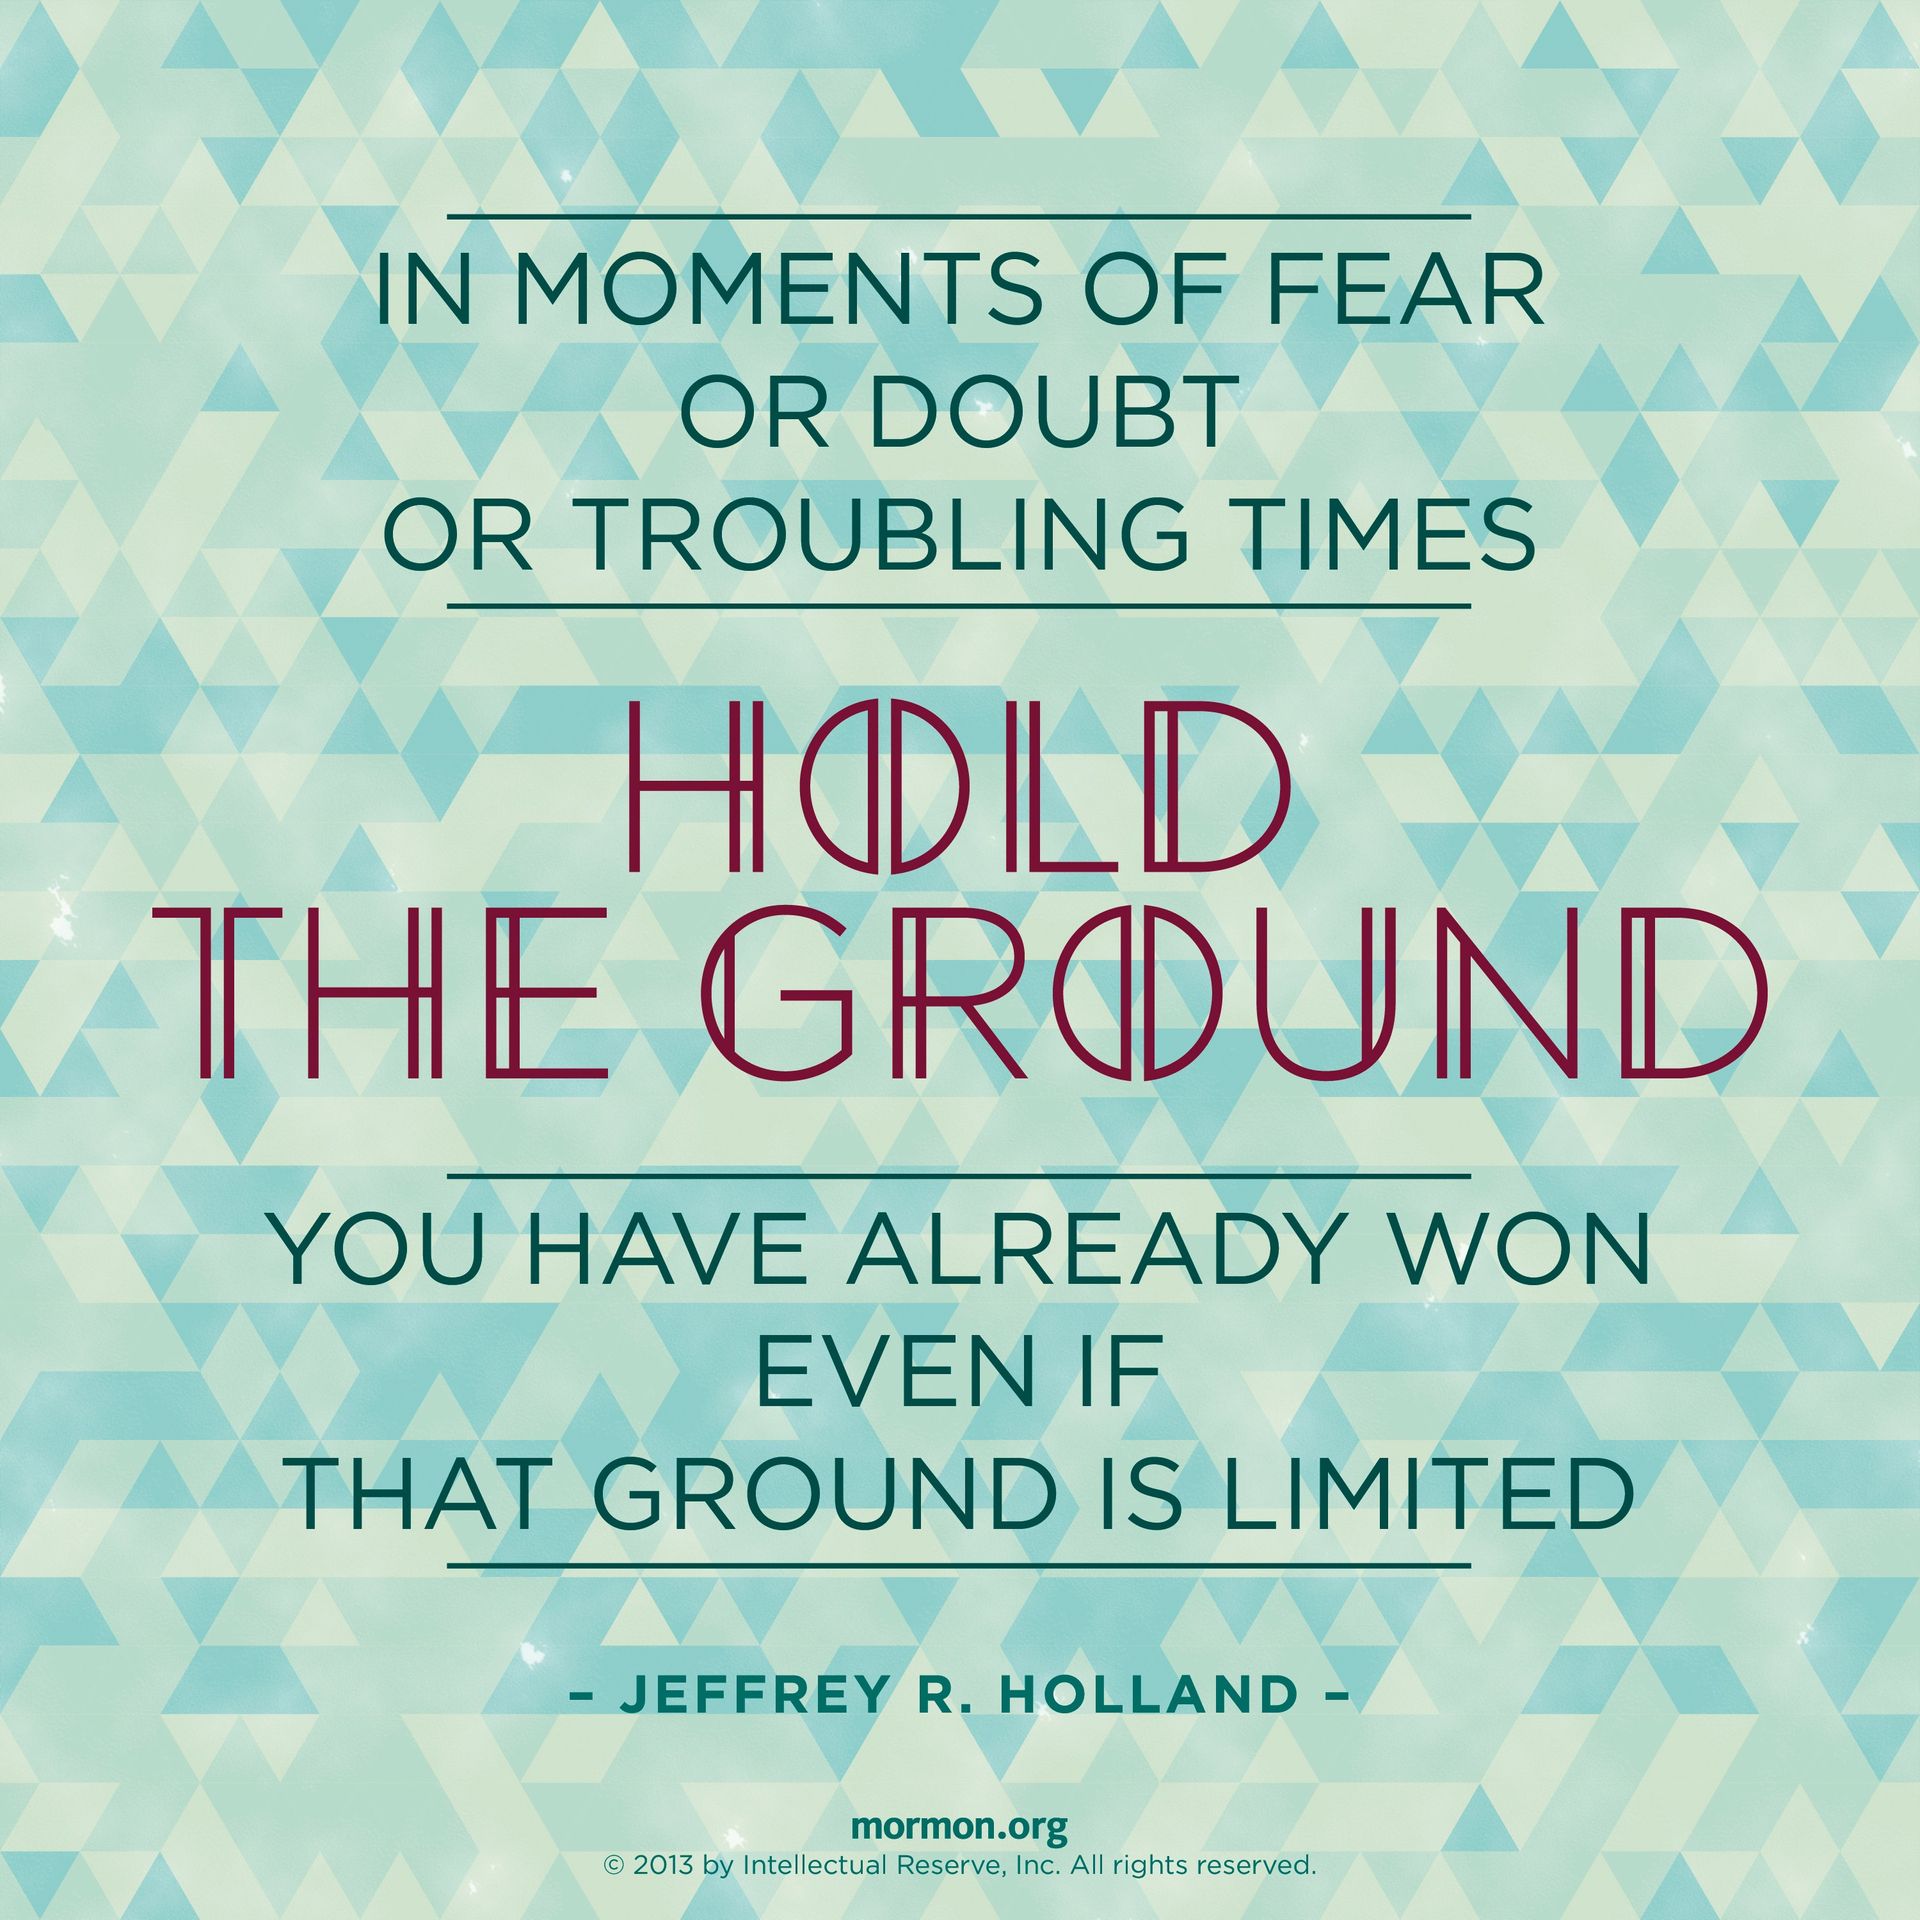 “In moments of fear or doubt or troubling times, hold the ground you have already won, even if that ground is limited.”—Elder Jeffrey R. Holland, “Lord, I Believe”